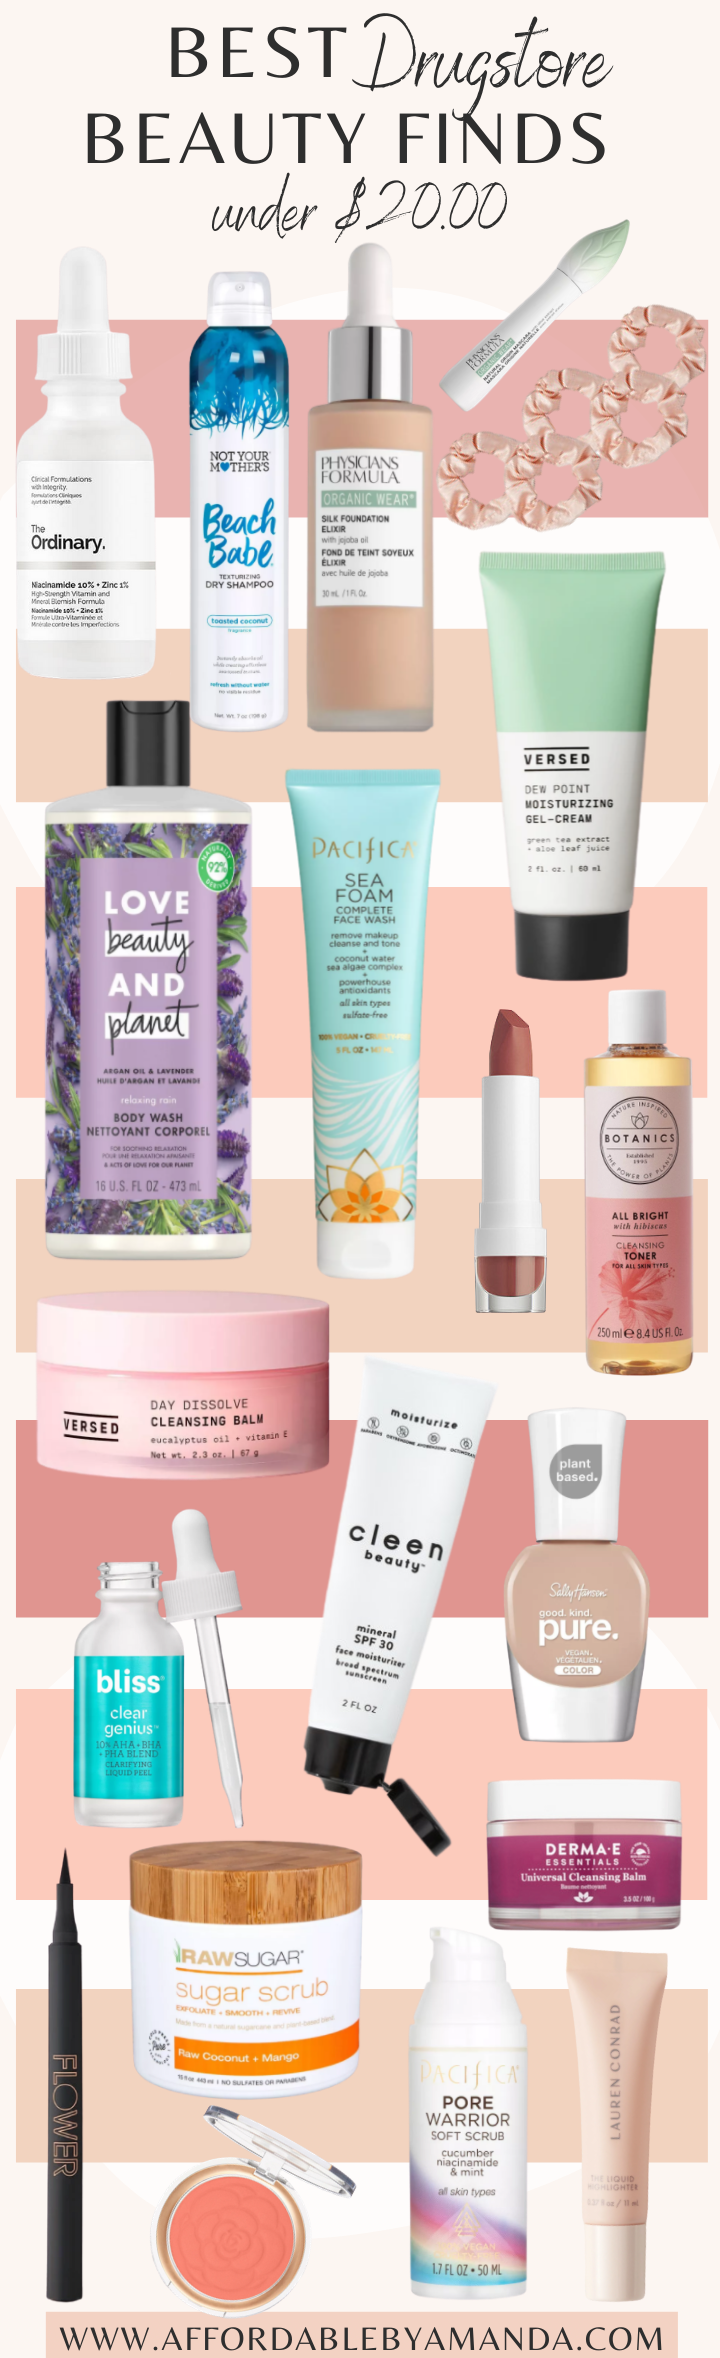 The Best New Drugstore Beauty Products of 2020 | Affordable by Amanda 